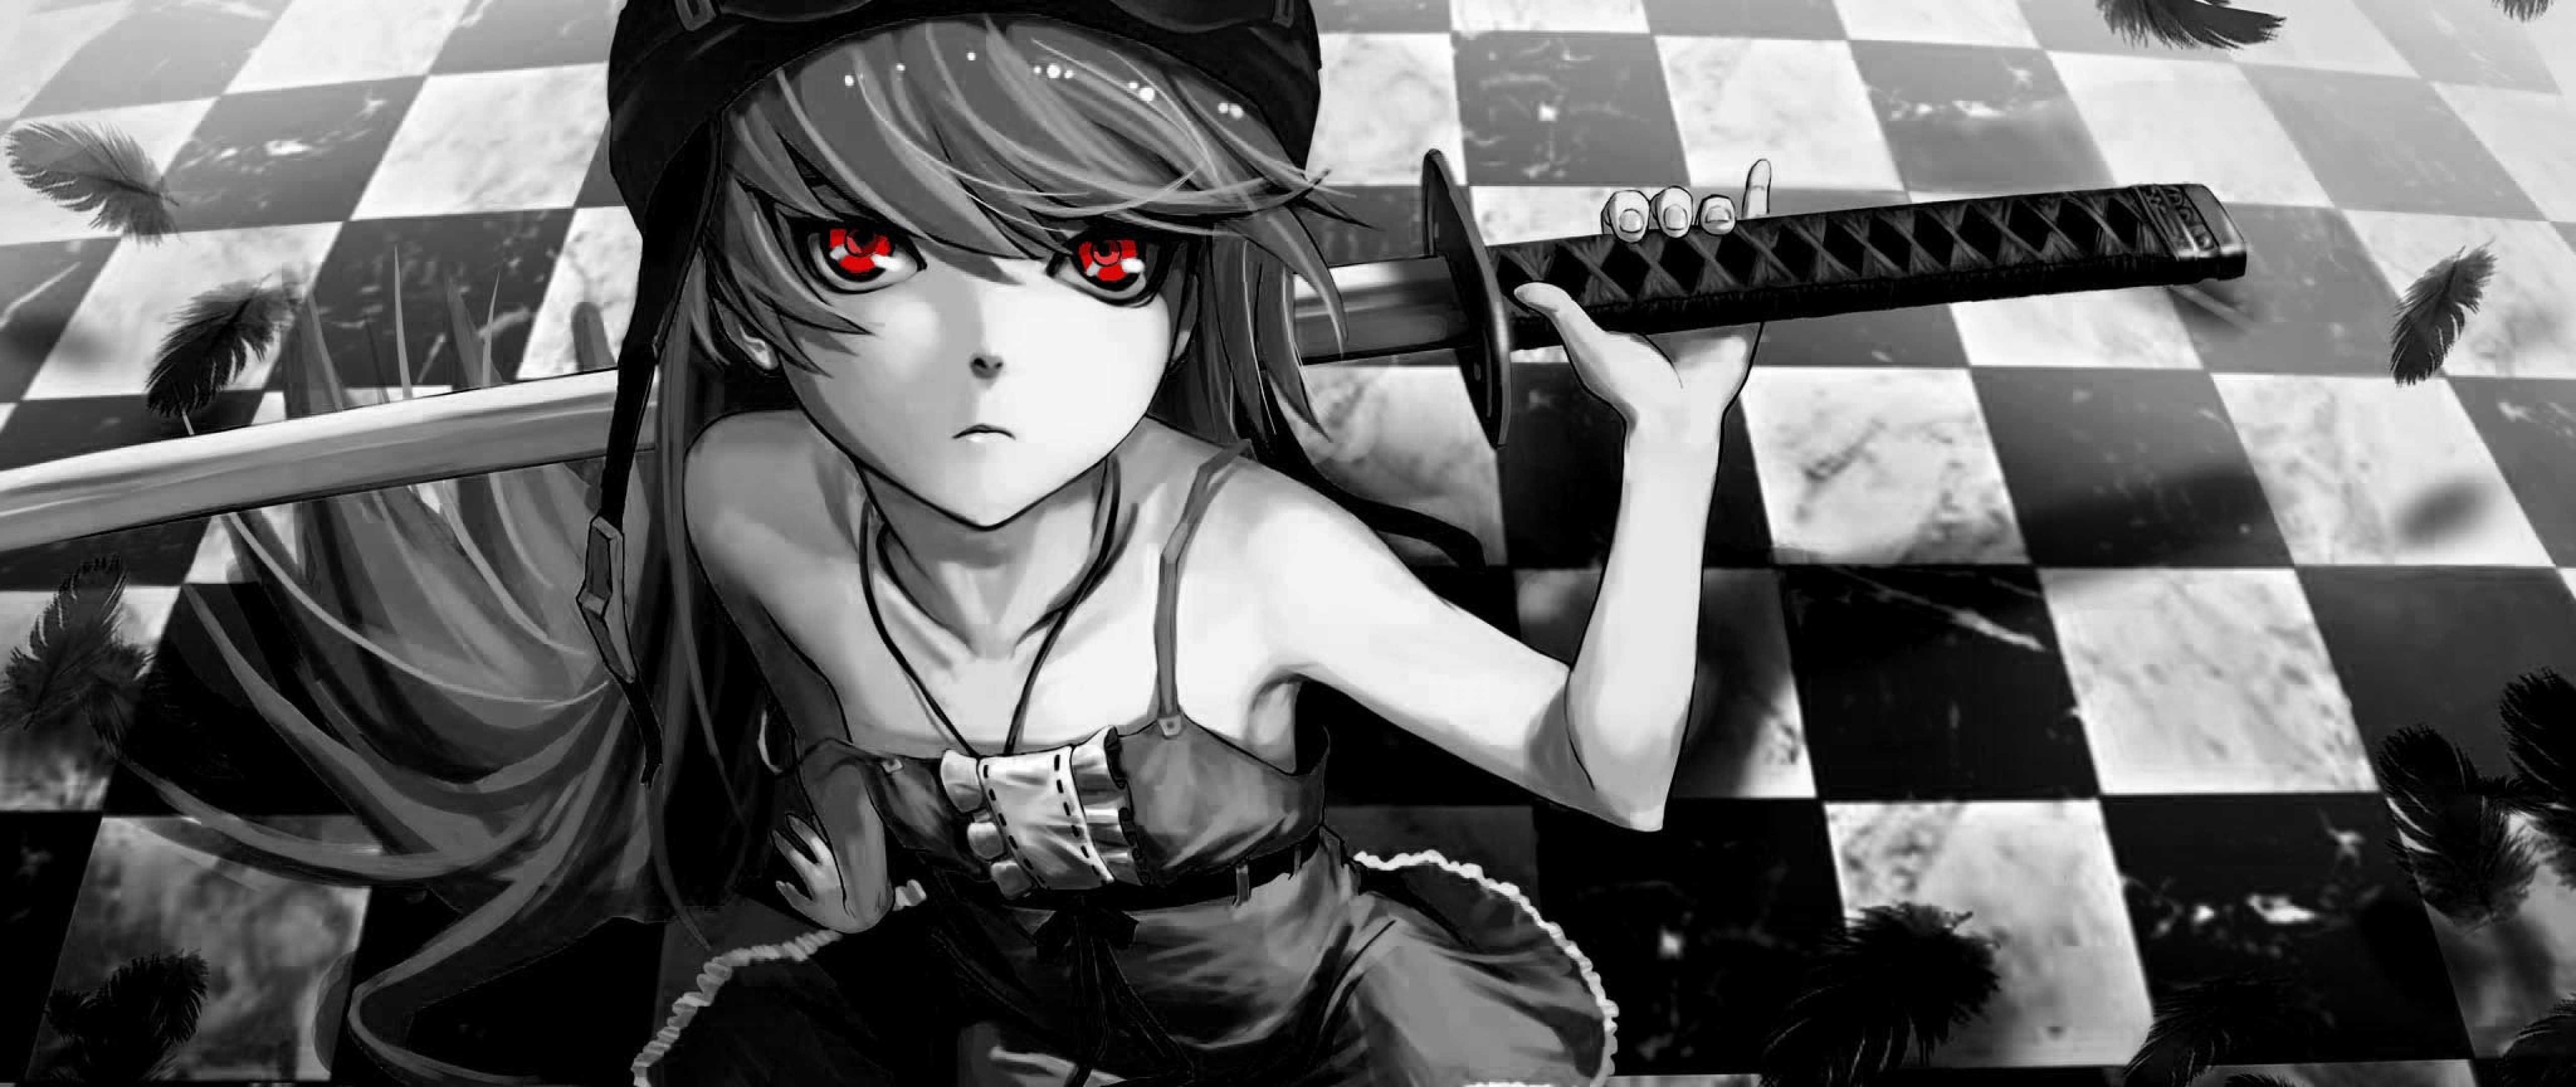 Black And White Anime Girl With Sword Wallpaper for Desktop and Mobiles ...